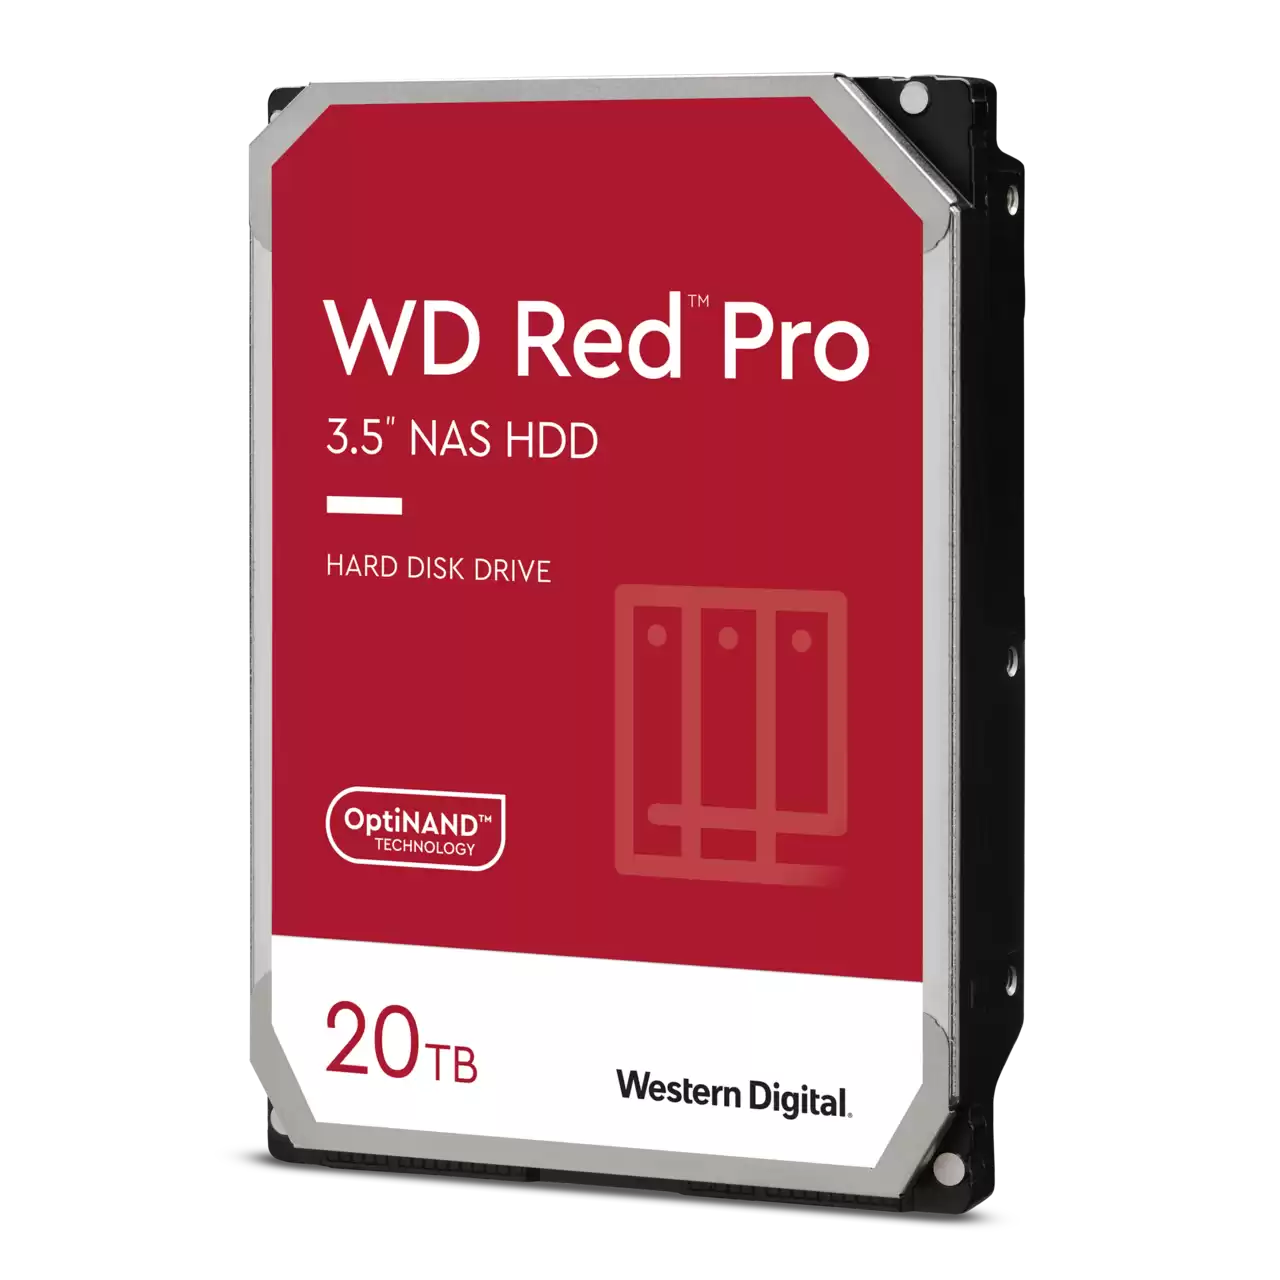 Western Digital 20TB WD Red Pro NAS Internal Hard Drive, 512MB Cache - WD201KFGX - image 1 of 3